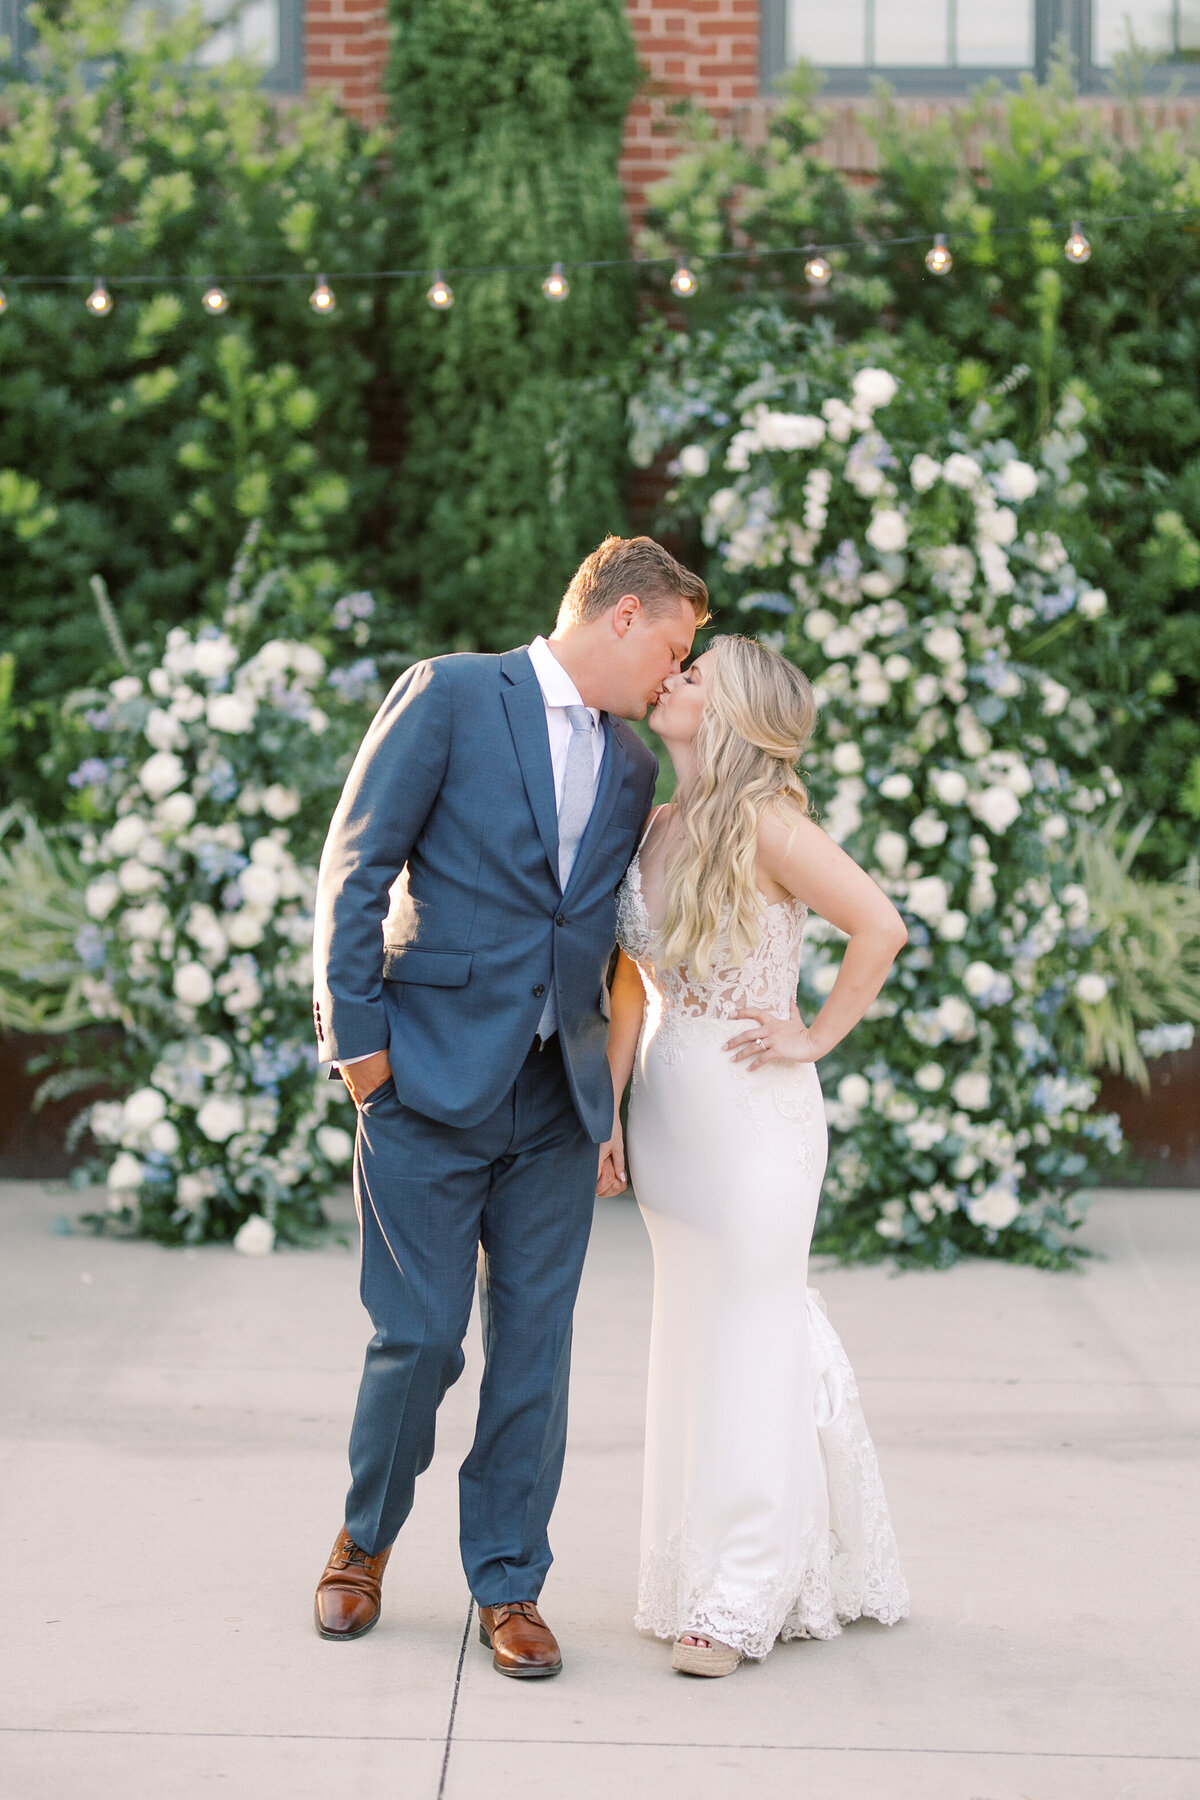 Laura + Nate | Wedding at The Cedar Room by Pure Luxe Bride: Charleston Wedding and Event Planners